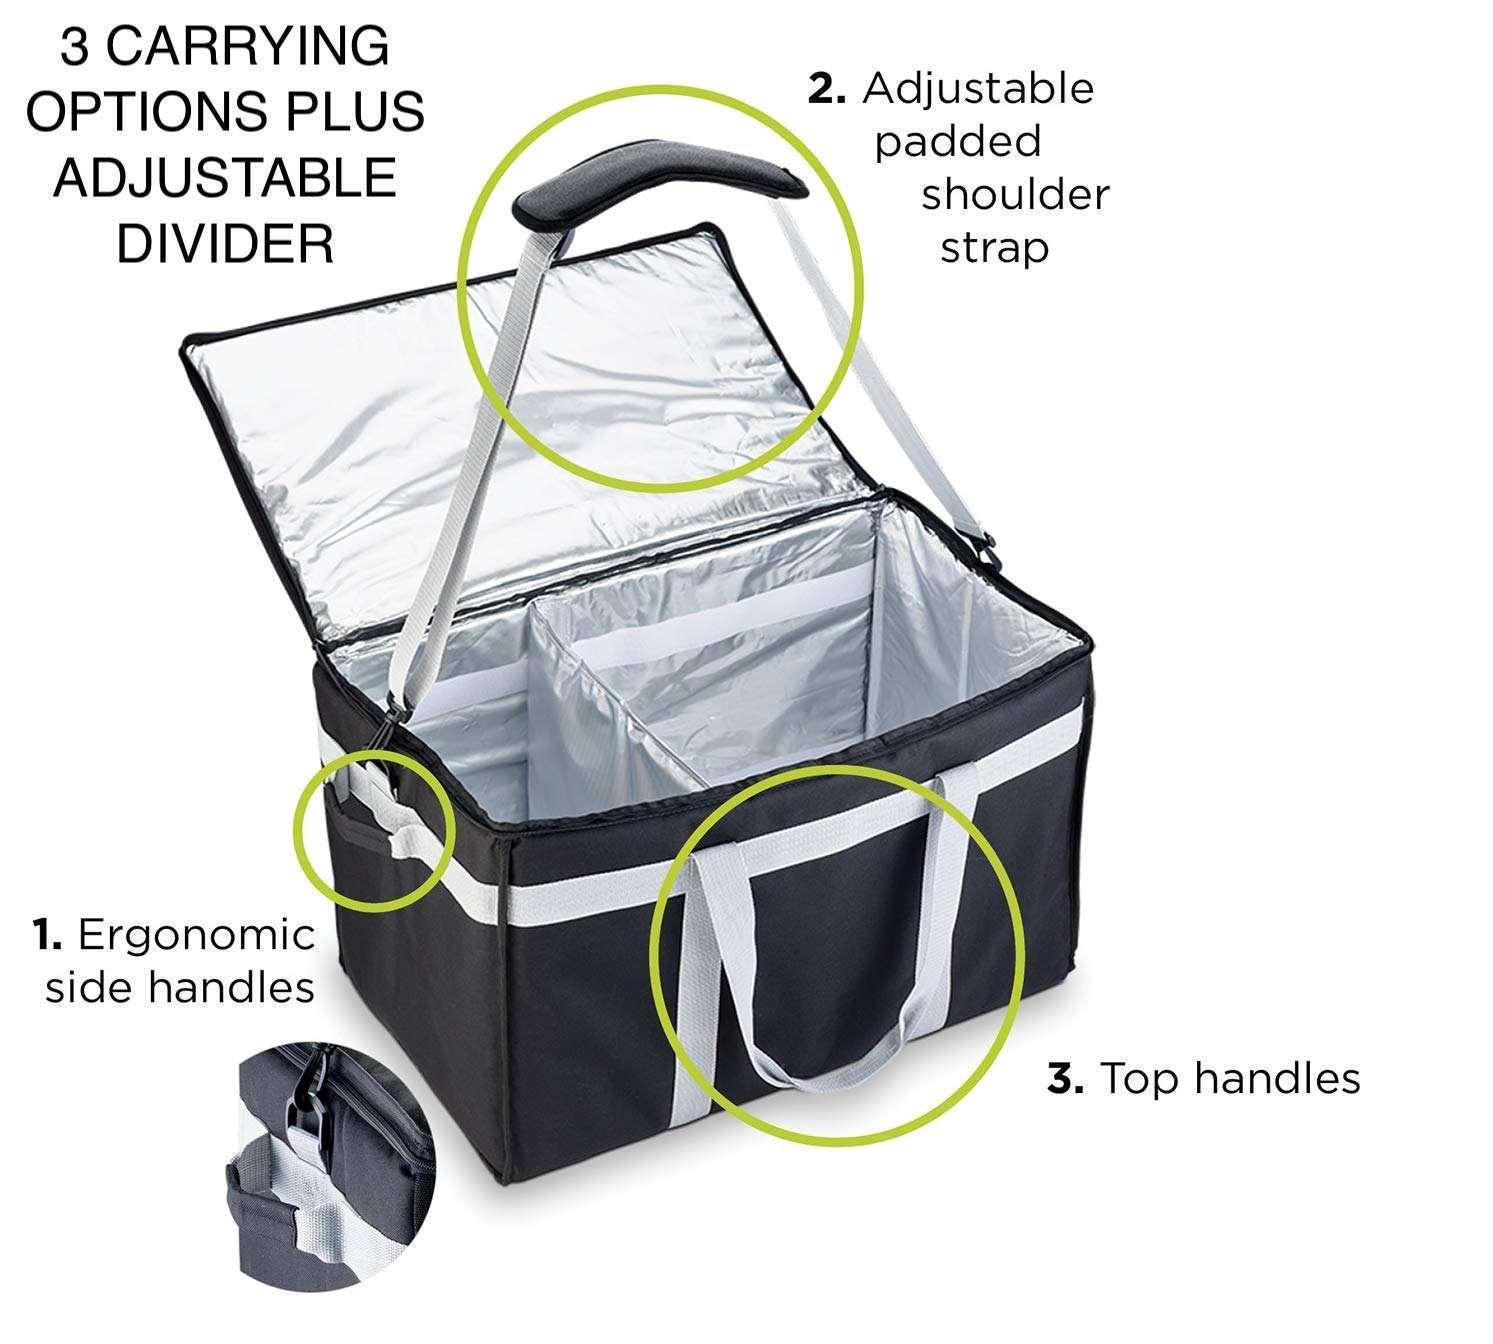 Reusable Shopping Insulated Cooler Food Delivery Bags with Adjustable Divider,Thermal Catering Tote Bags